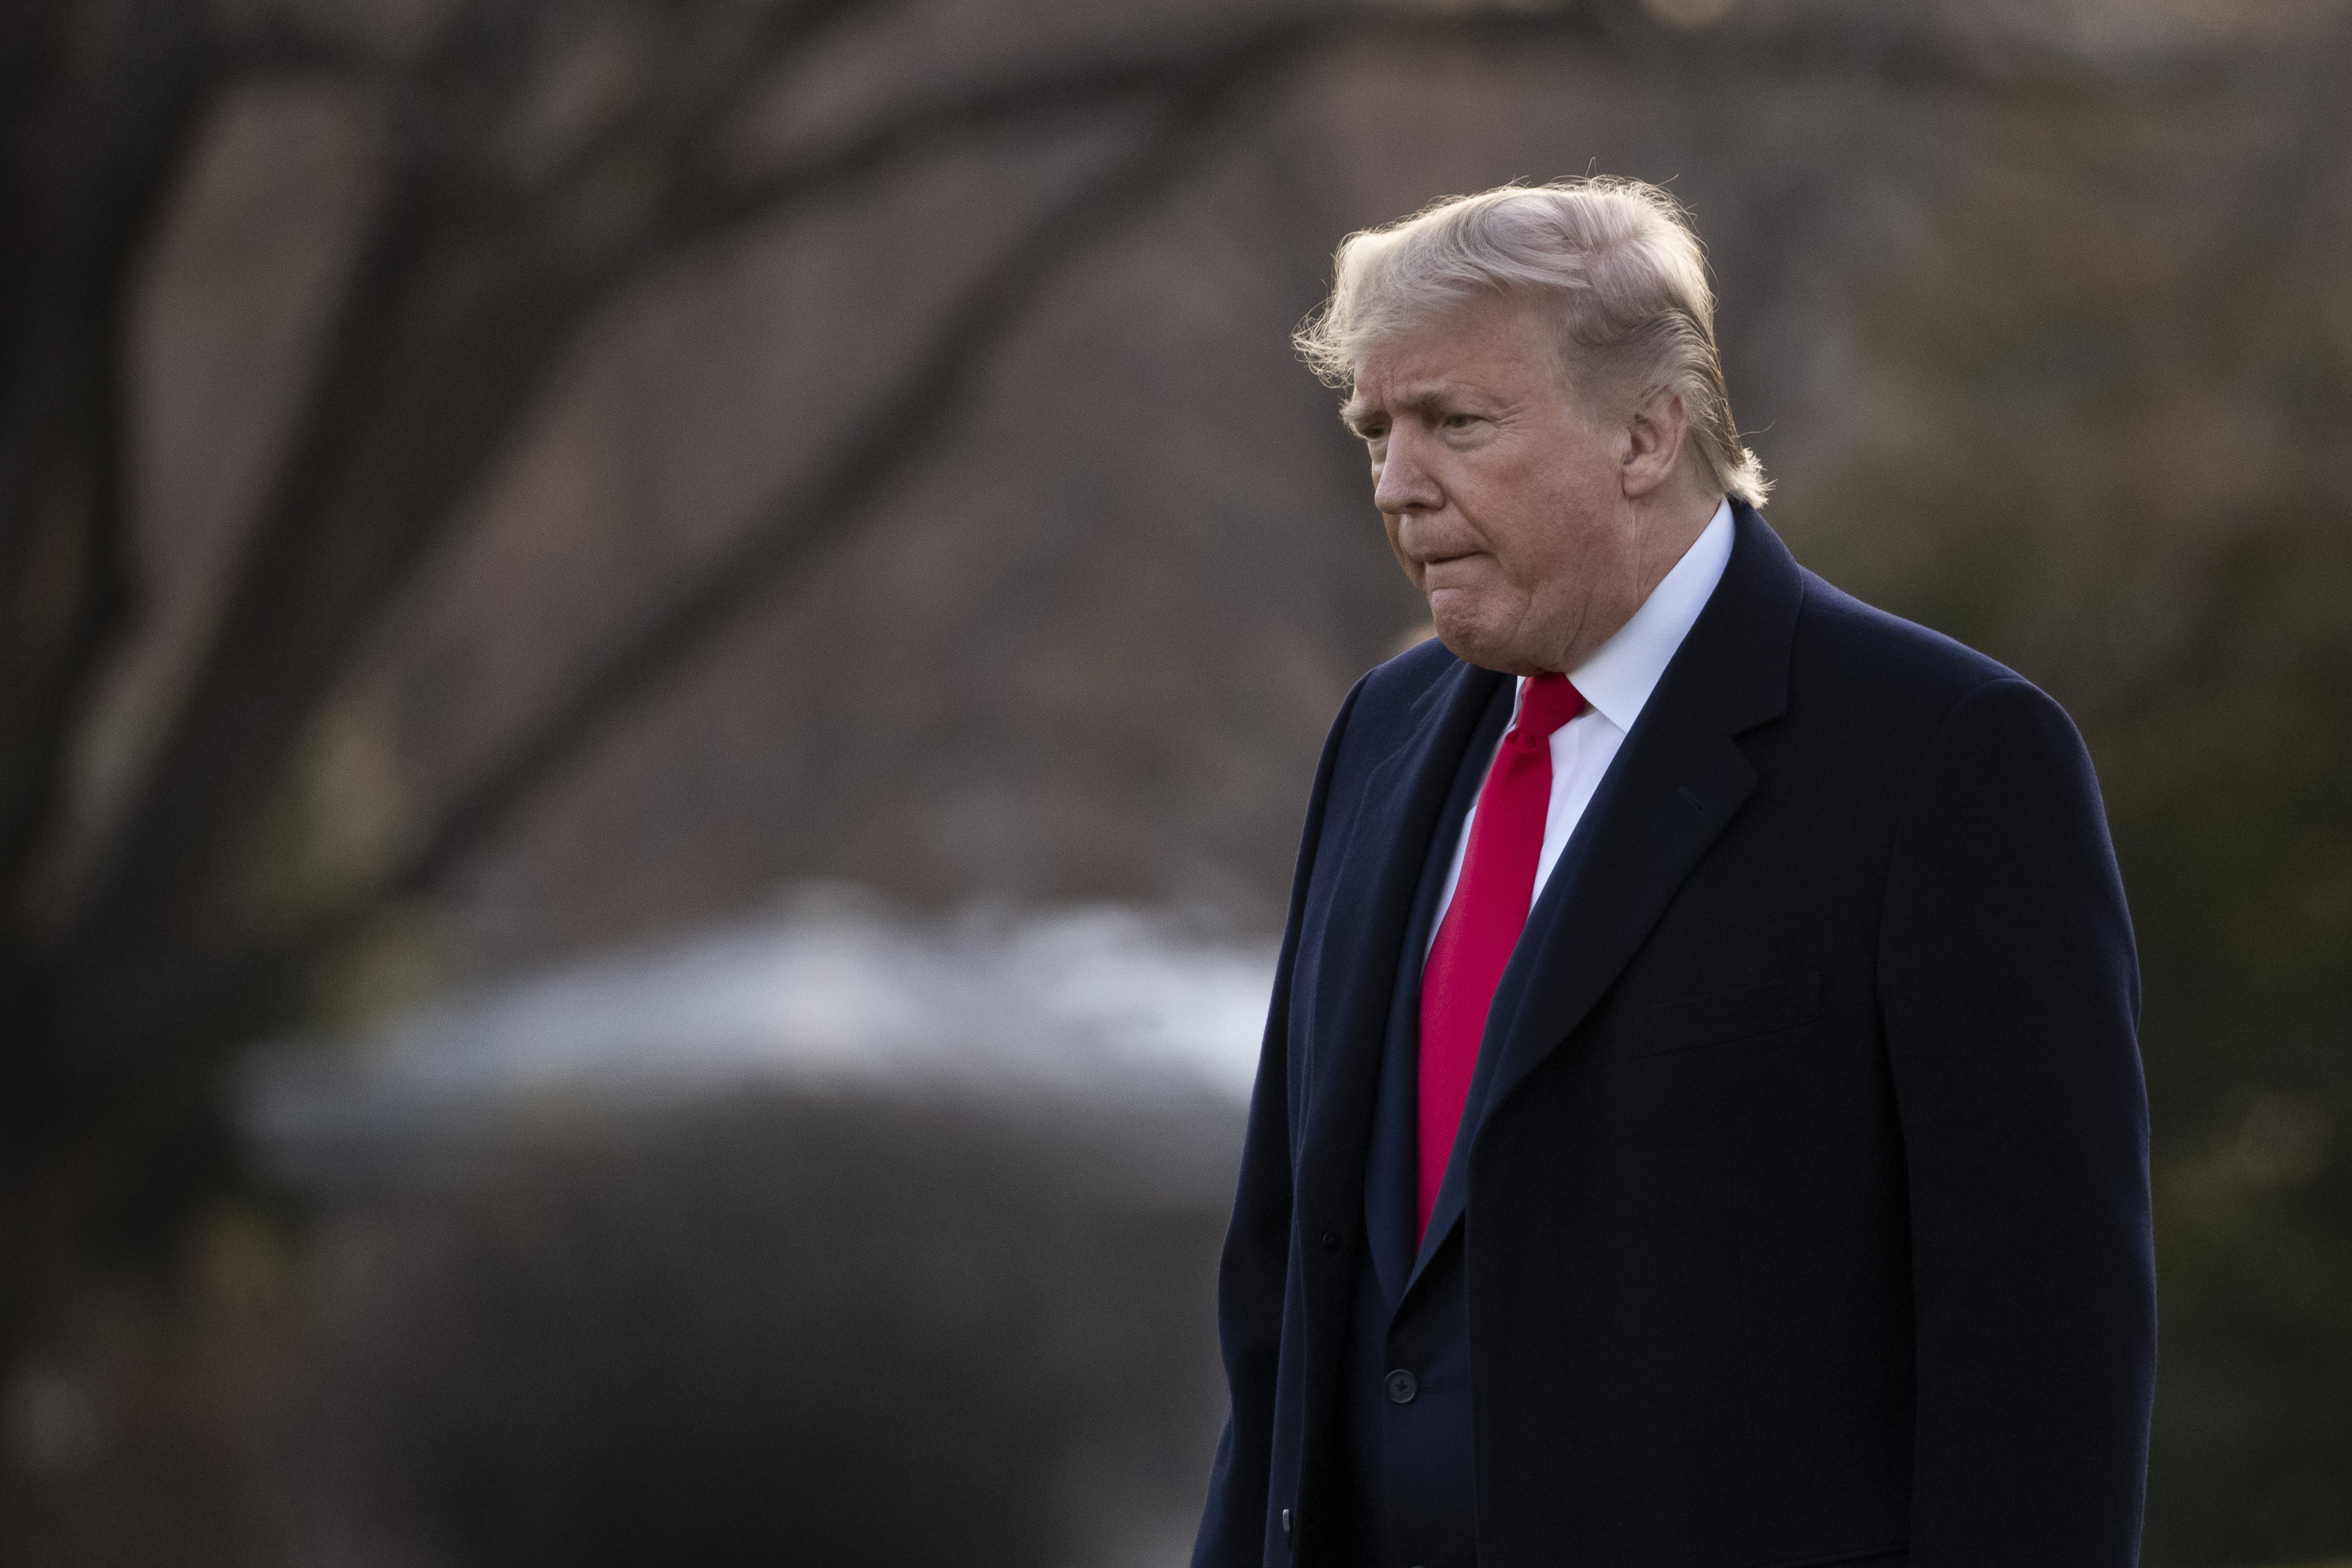 President Donald Trump walks to board Marine One on the South Lawn of the White House, Thursday, Jan. 9, 2020, in Washington. Trump is en route to Ohio for a campaign rally. (AP Photo/Alex Brandon)